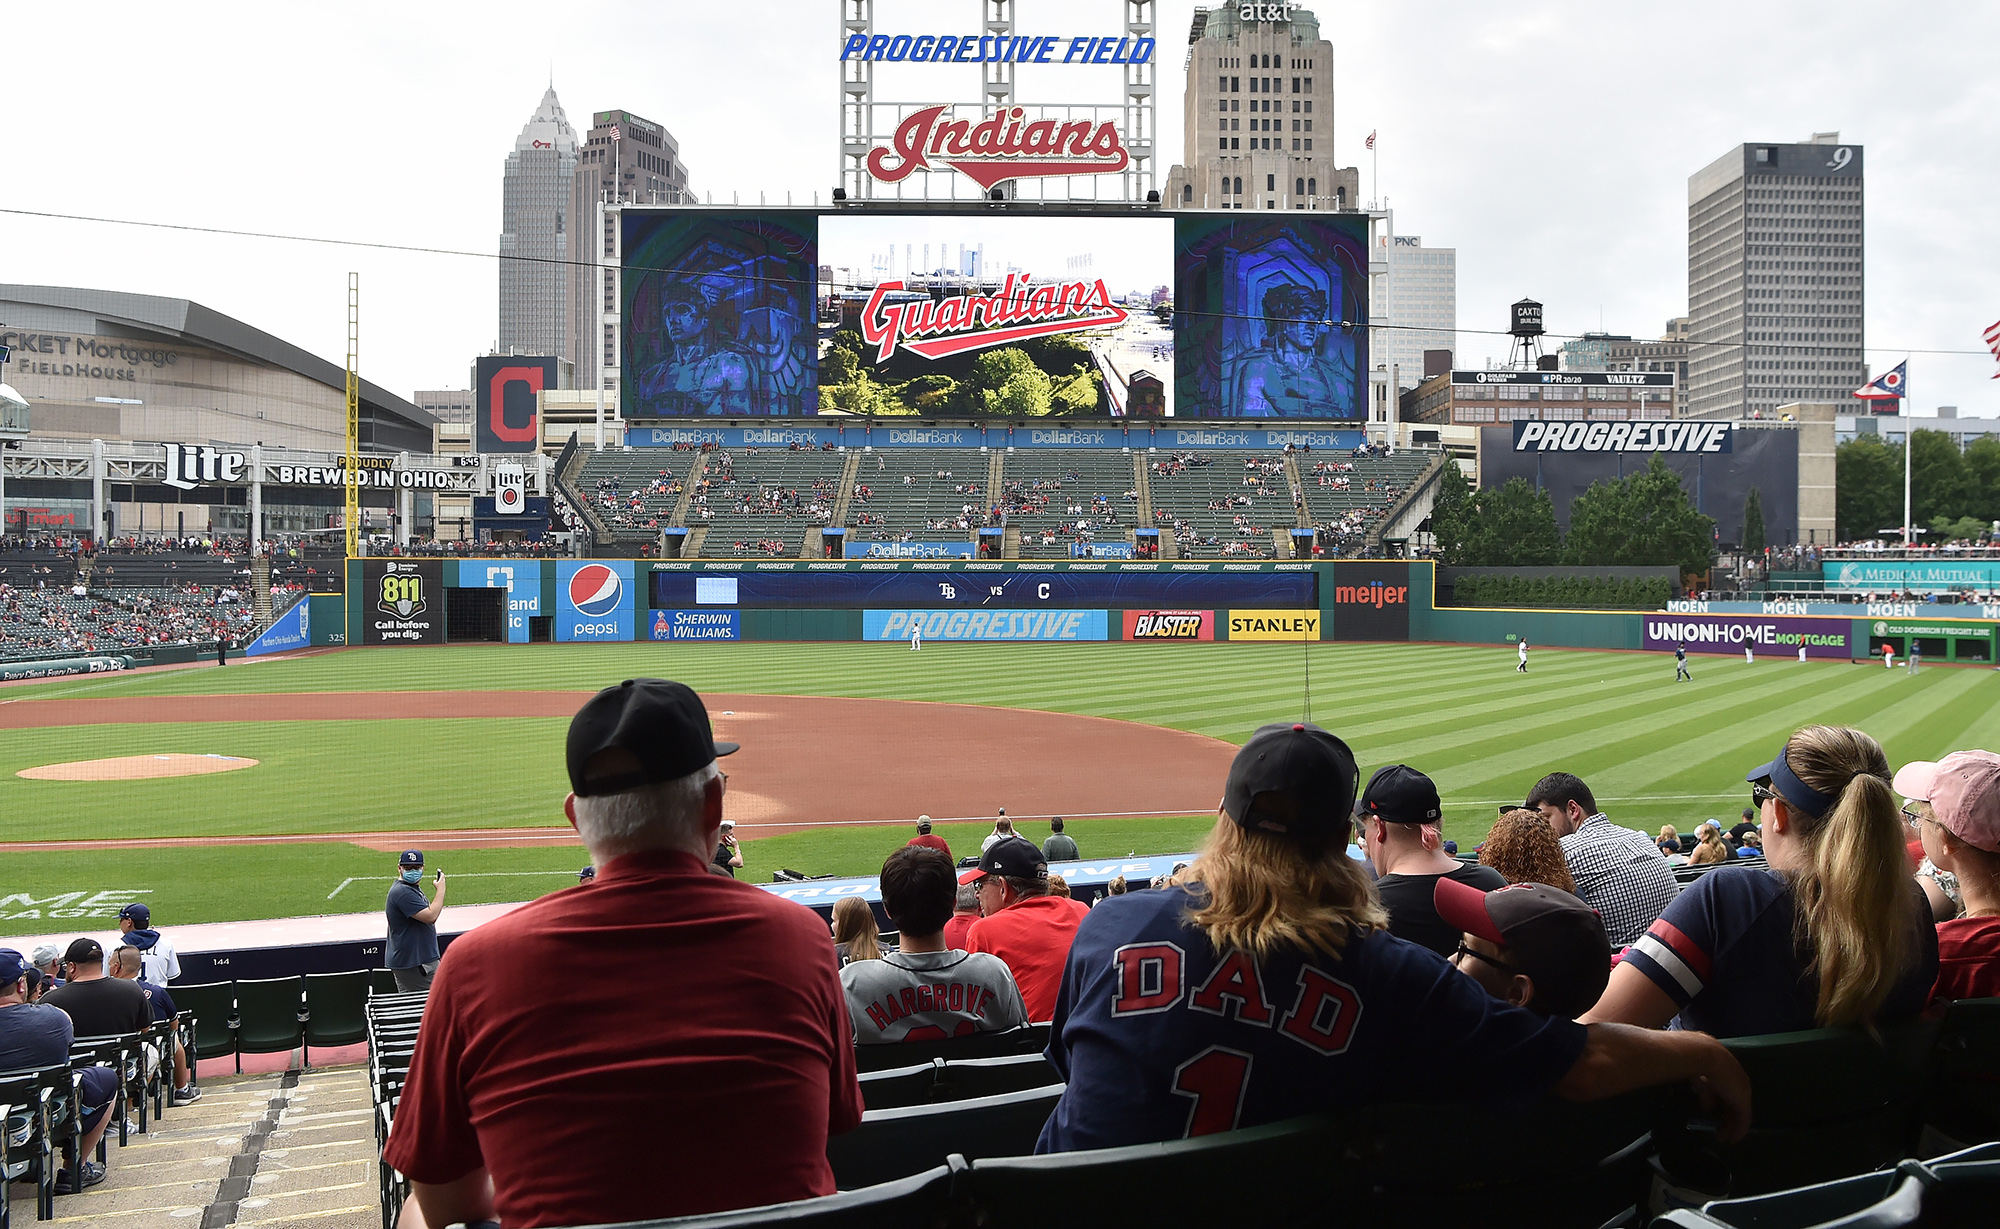 Father, son get controversial view at Cleveland Indians game